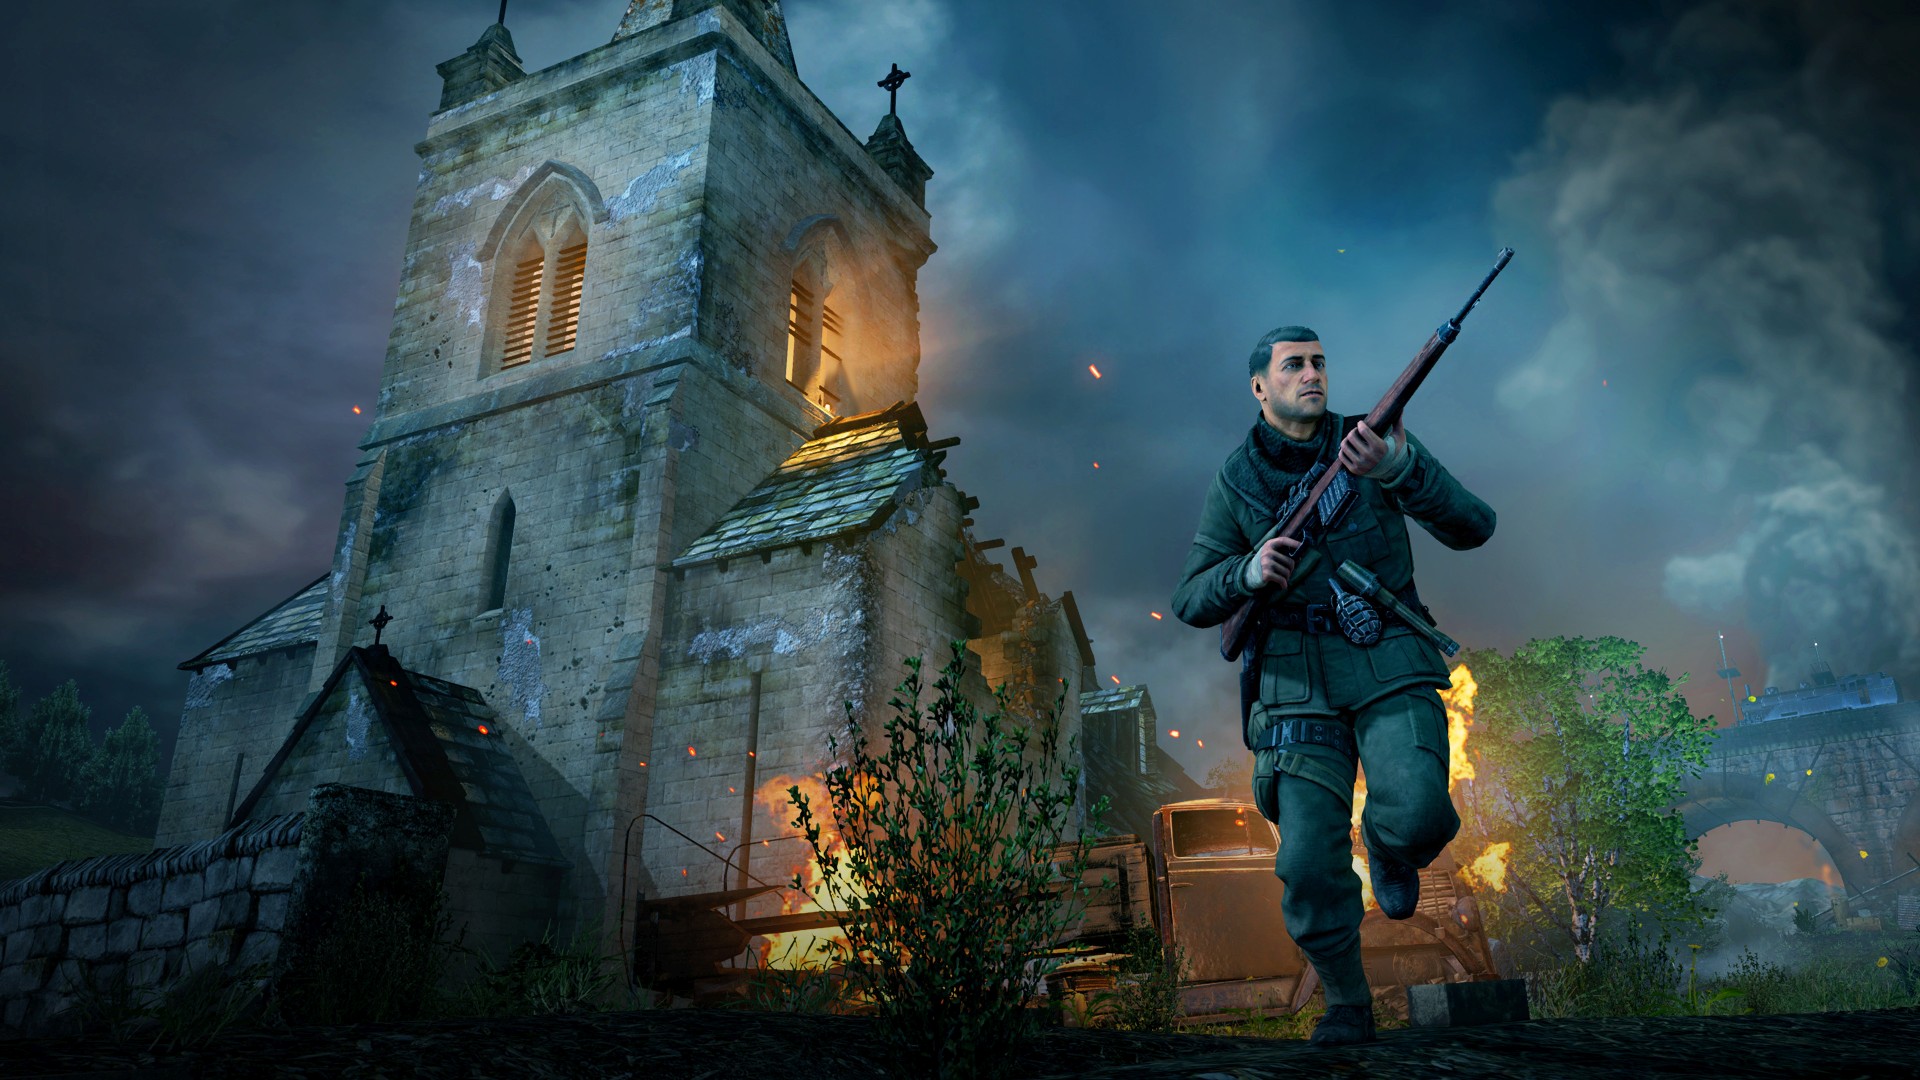 Stay on Target with These Sniper Elite V2 Remastered Tips and Tricks